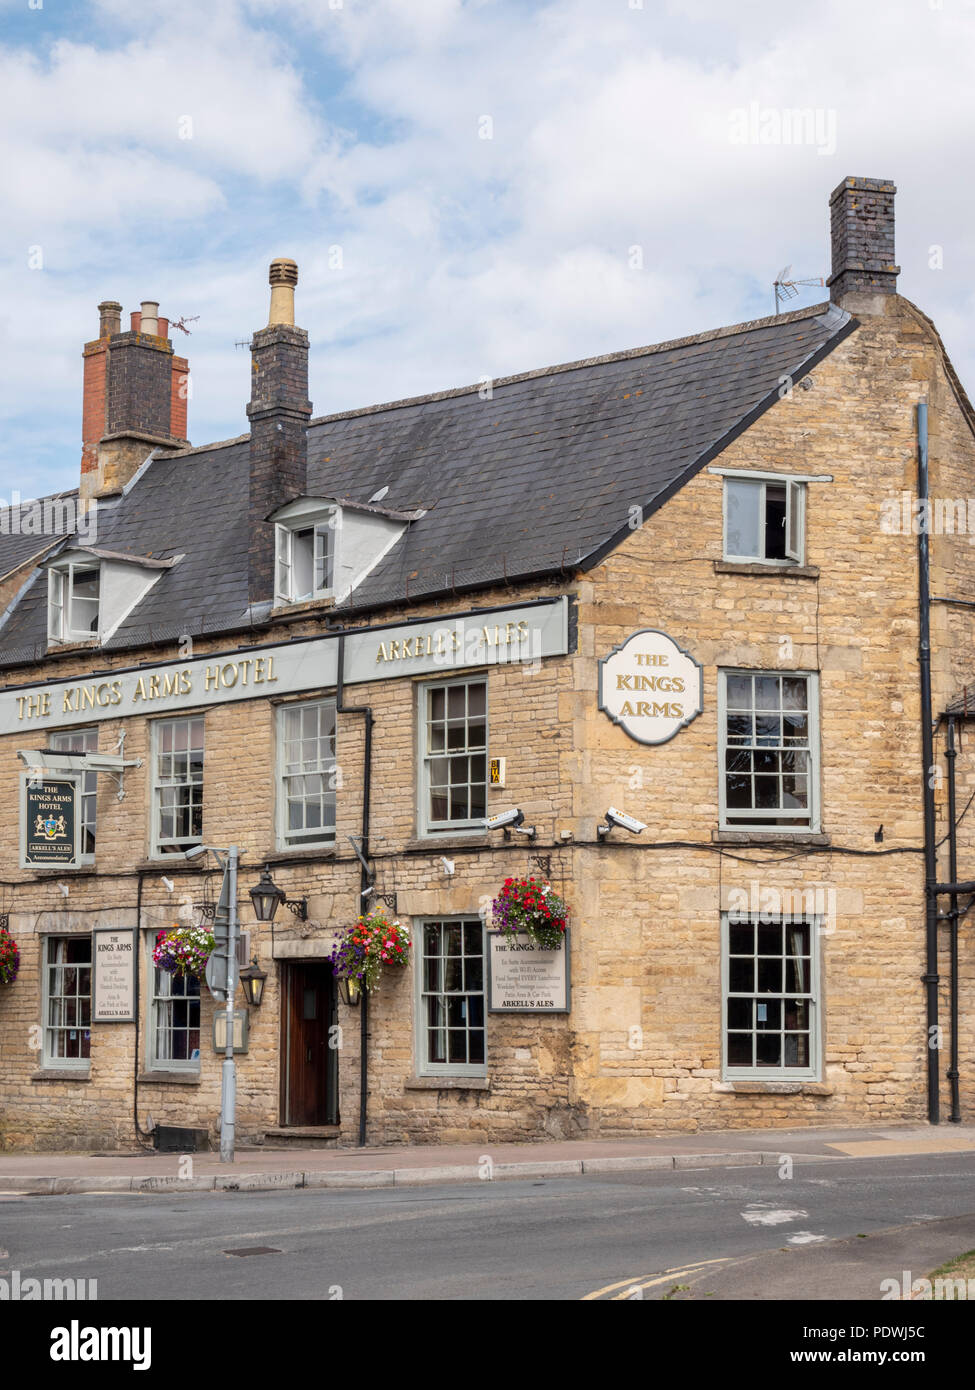 The Kings Arms Hotel and pub in the Cotswold town of Chipping Norton Oxfordshire, UK Stock Photo